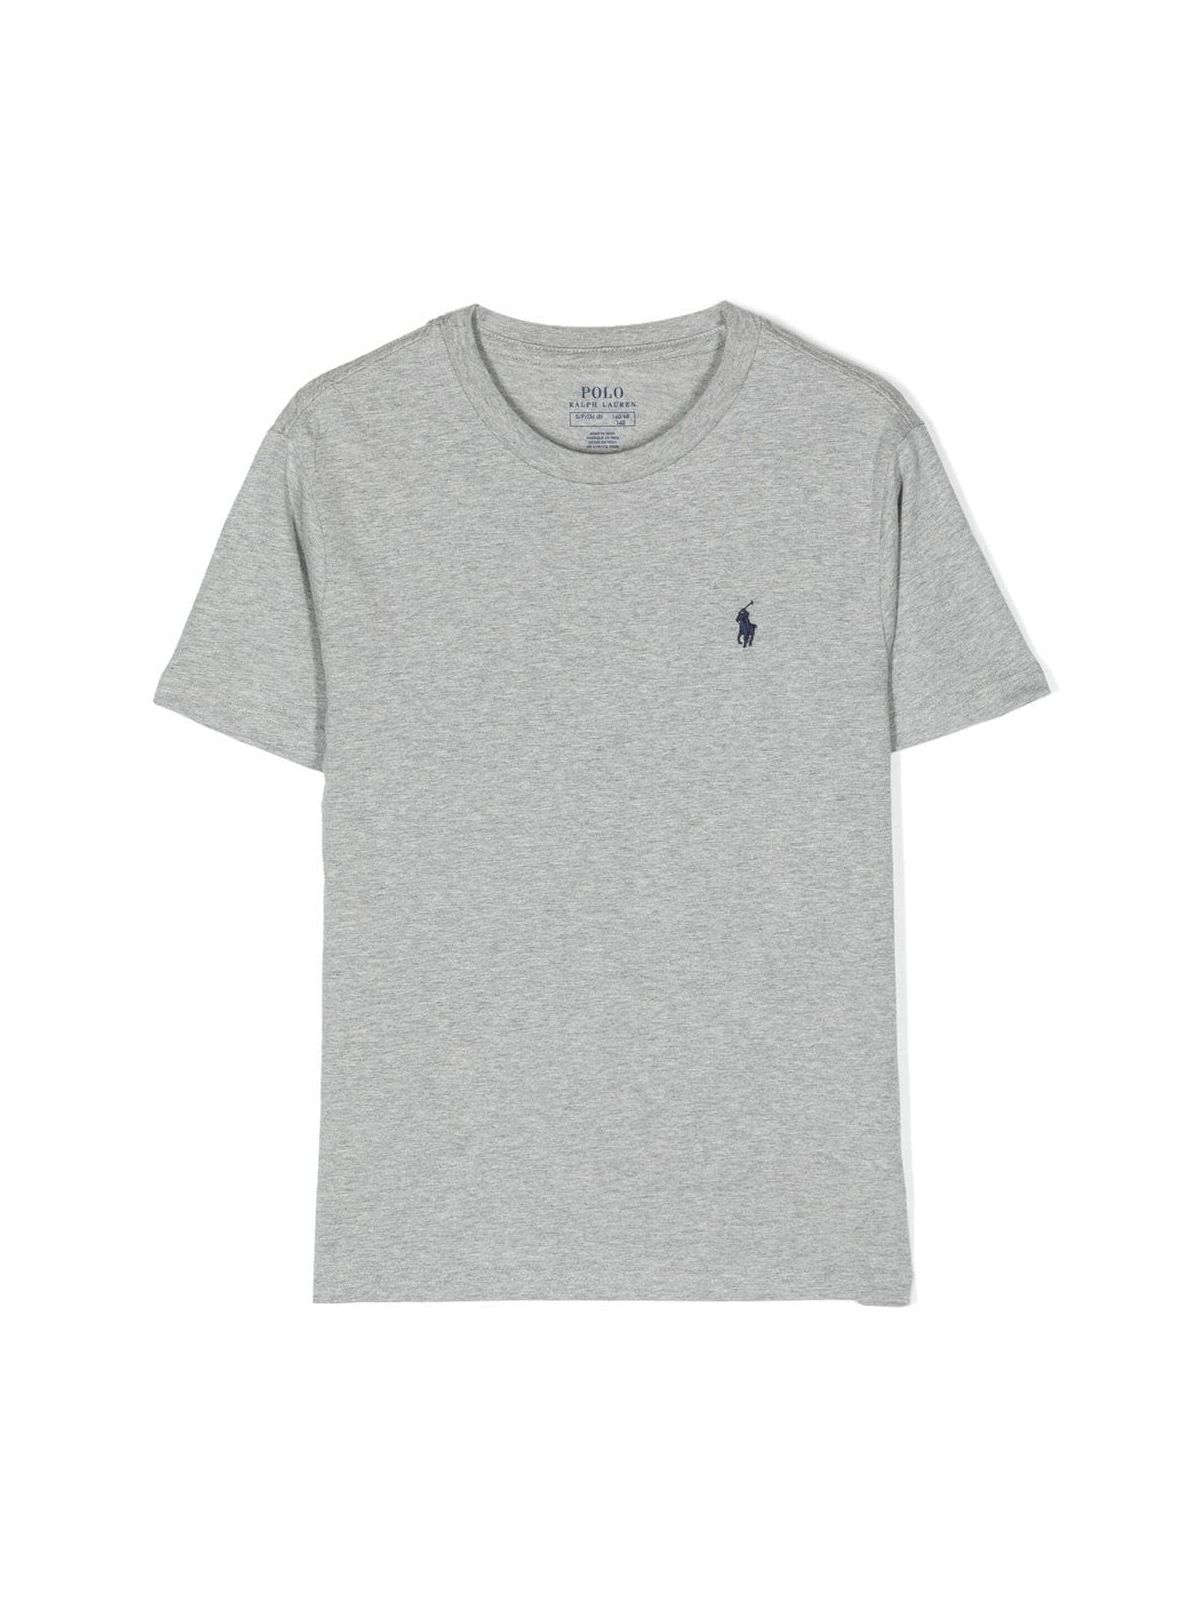 Polo Ralph Lauren Ls Cn Knit Shirts T-shirt In Andover Heather